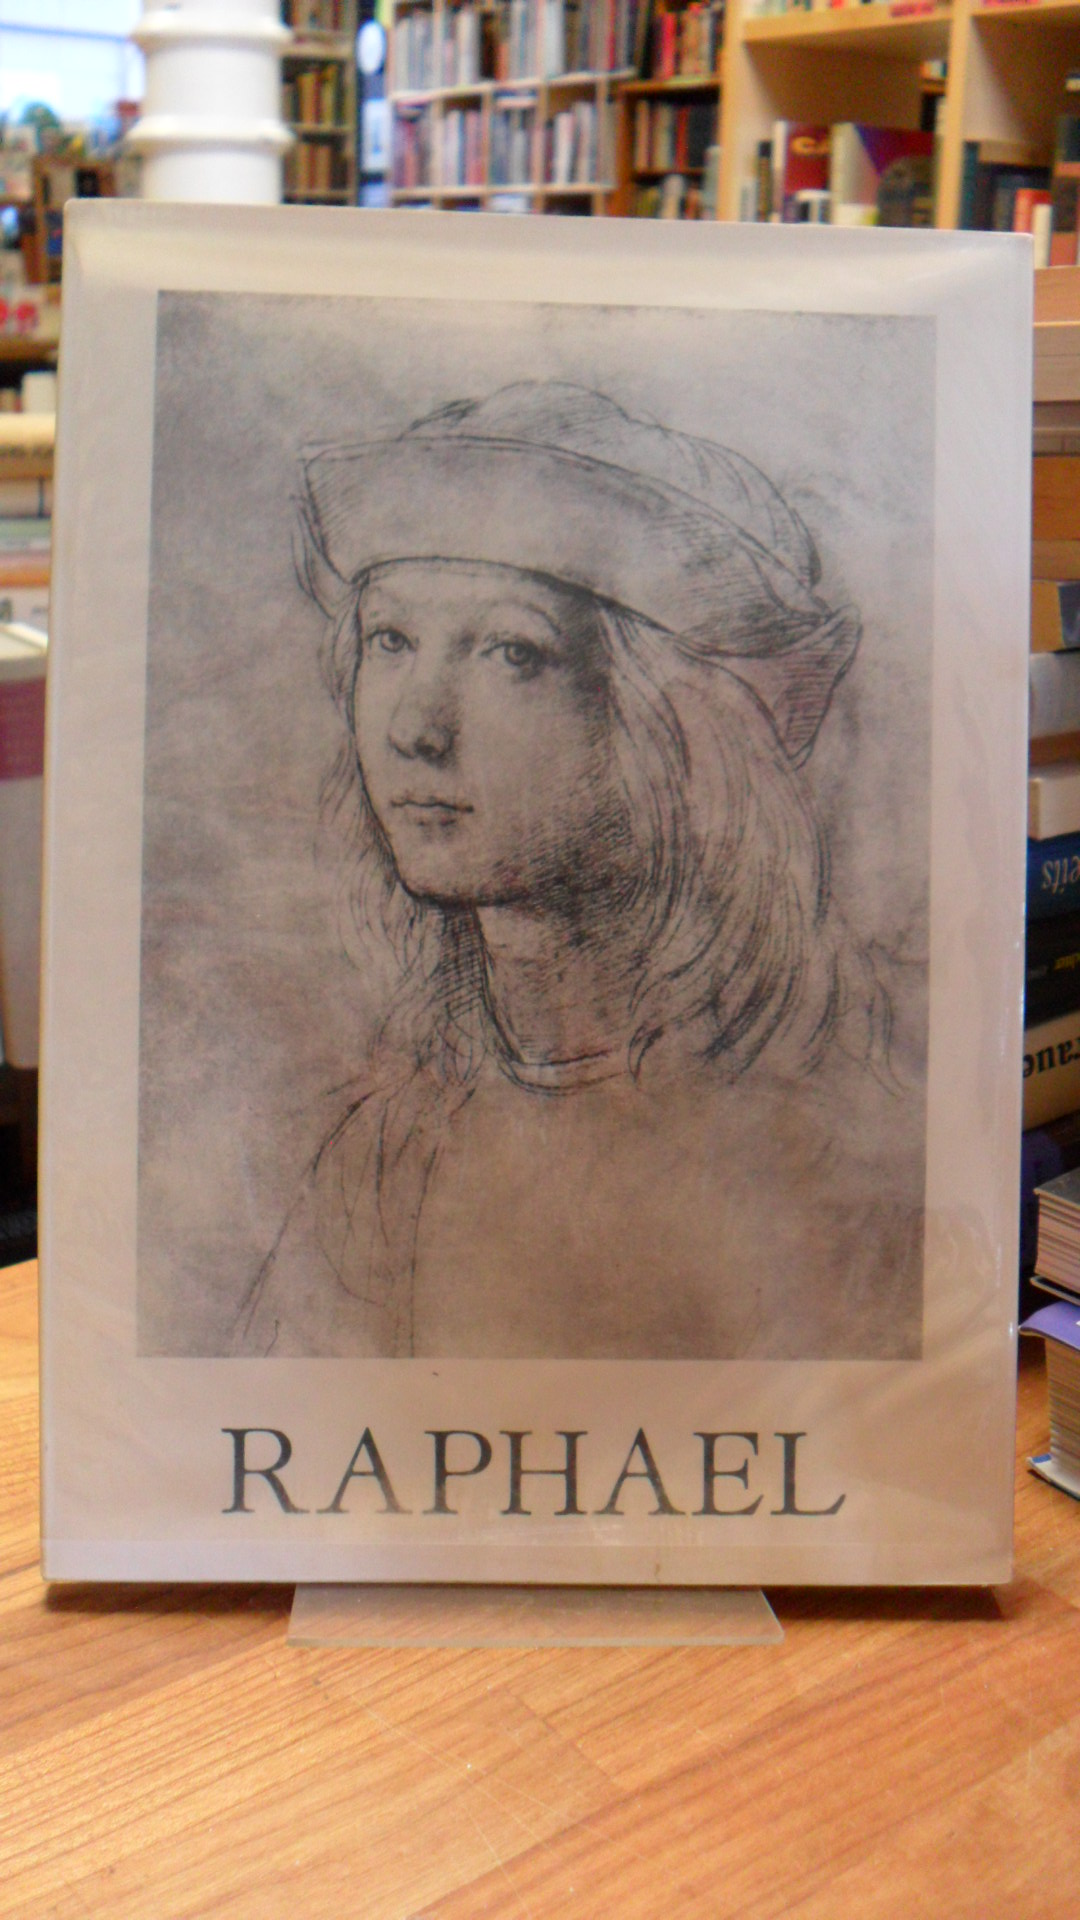 Raphael / Becherucci, Raphael – The Great Masters of Drawing,